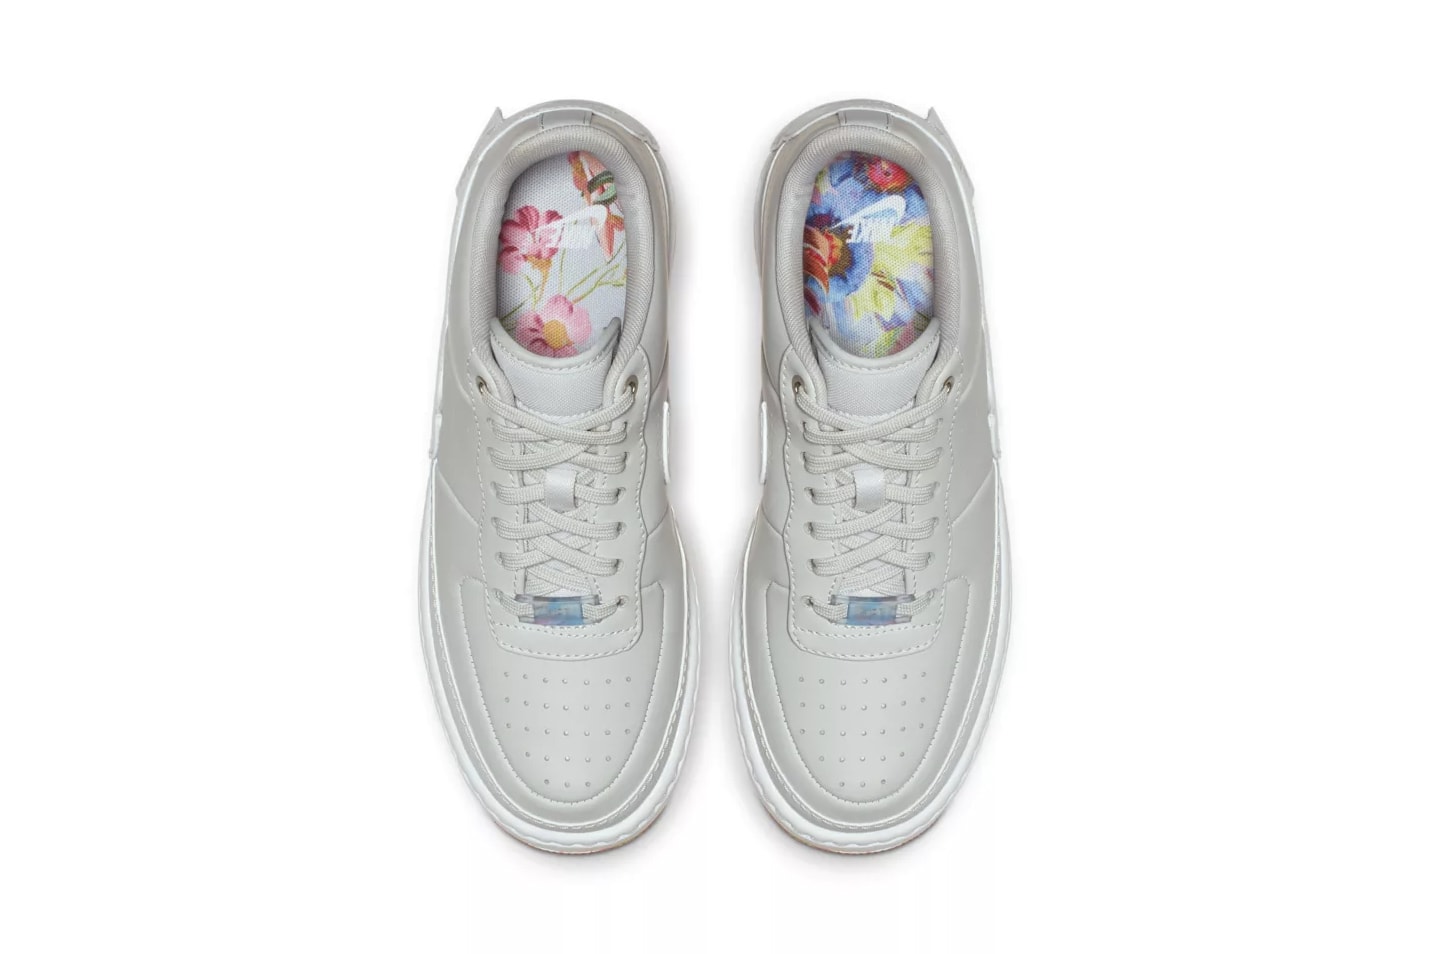 Nike Air Force 1 Jester XX Floral Print Sole